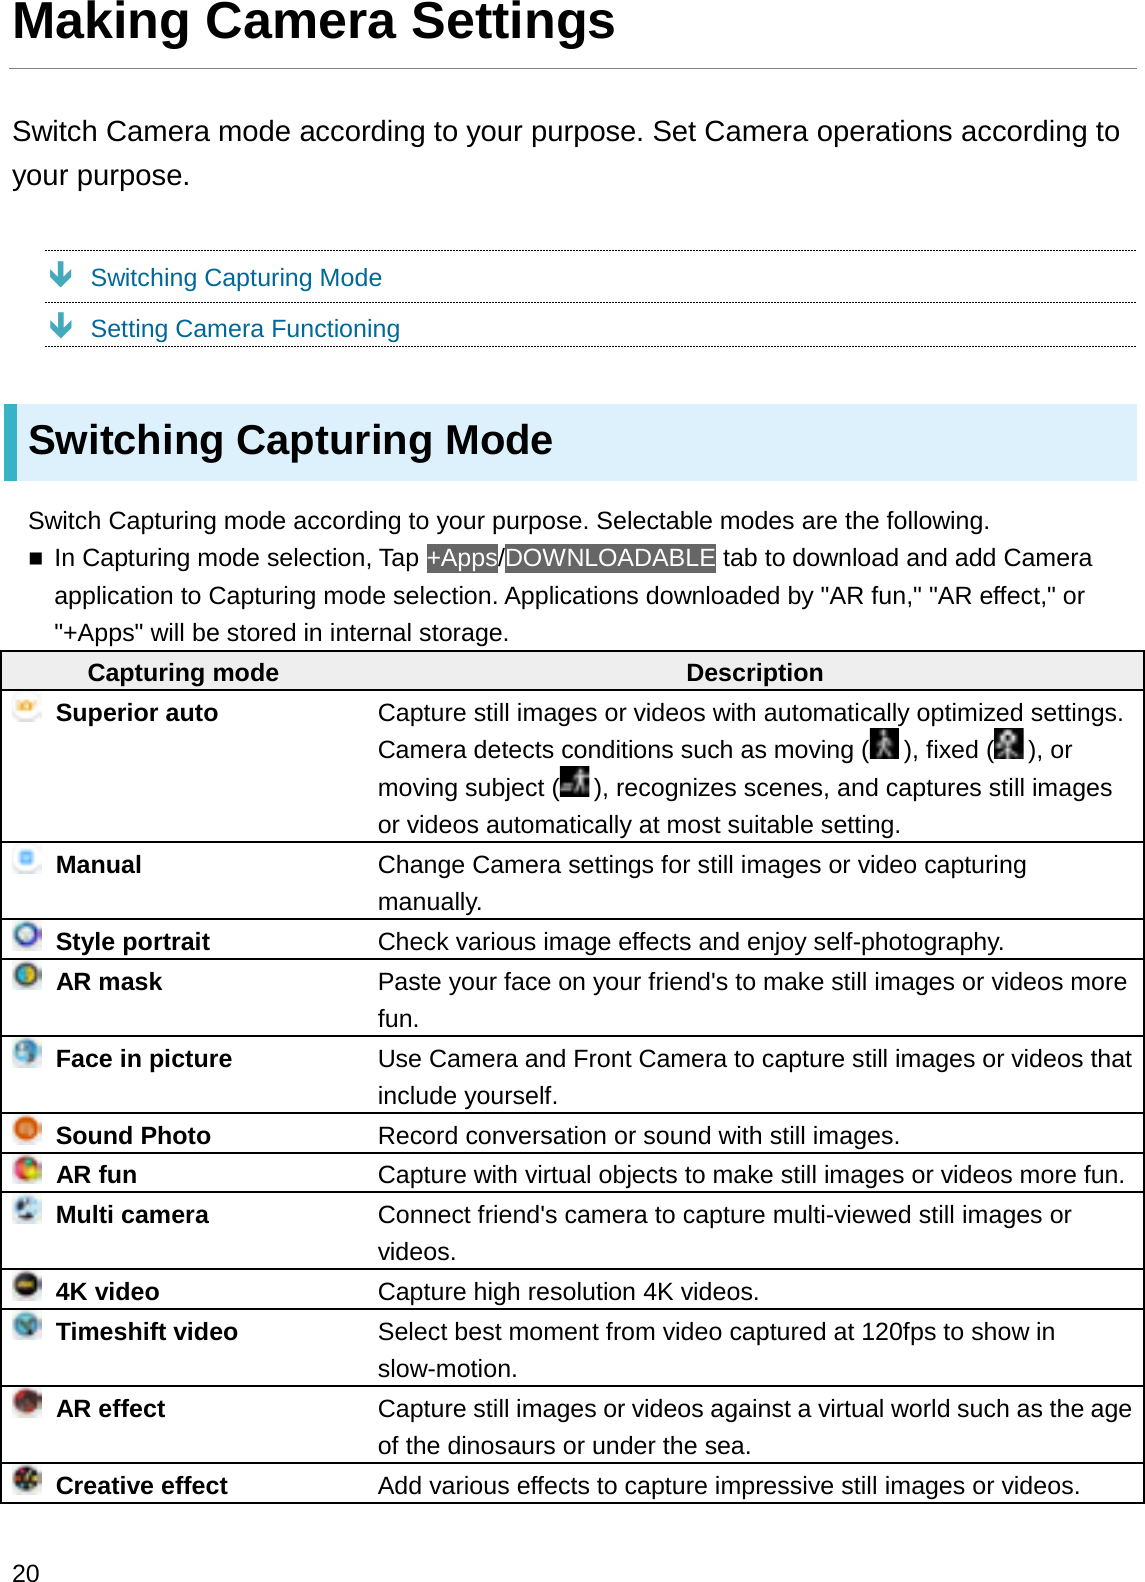 Making Camera SettingsSwitch Camera mode according to your purpose. Set Camera operations according to your purpose.ÐSwitching Capturing ModeÐSetting Camera FunctioningSwitching Capturing ModeSwitch Capturing mode according to your purpose. Selectable modes are the following.In Capturing mode selection, Tap +Apps/DOWNLOADABLE tab to download and add Camera application to Capturing mode selection. Applications downloaded by &quot;AR fun,&quot; &quot;AR effect,&quot; or &quot;+Apps&quot; will be stored in internal storage.Capturing mode DescriptionSuperior auto Capture still images or videos with automatically optimized settings.Camera detects conditions such as moving ( ), fixed ( ), or moving subject ( ), recognizes scenes, and captures still images or videos automatically at most suitable setting.Manual Change Camera settings for still images or video capturing manually.Style portrait Check various image effects and enjoy self-photography.AR mask Paste your face on your friend&apos;s to make still images or videos more fun.Face in picture Use Camera and Front Camera to capture still images or videos that include yourself.Sound Photo Record conversation or sound with still images.AR fun Capture with virtual objects to make still images or videos more fun.Multi camera Connect friend&apos;s camera to capture multi-viewed still images or videos.4K video Capture high resolution 4K videos.Timeshift video Select best moment from video captured at 120fps to show in slow-motion.AR effect Capture still images or videos against a virtual world such as the age of the dinosaurs or under the sea.Creative effect Add various effects to capture impressive still images or videos.20